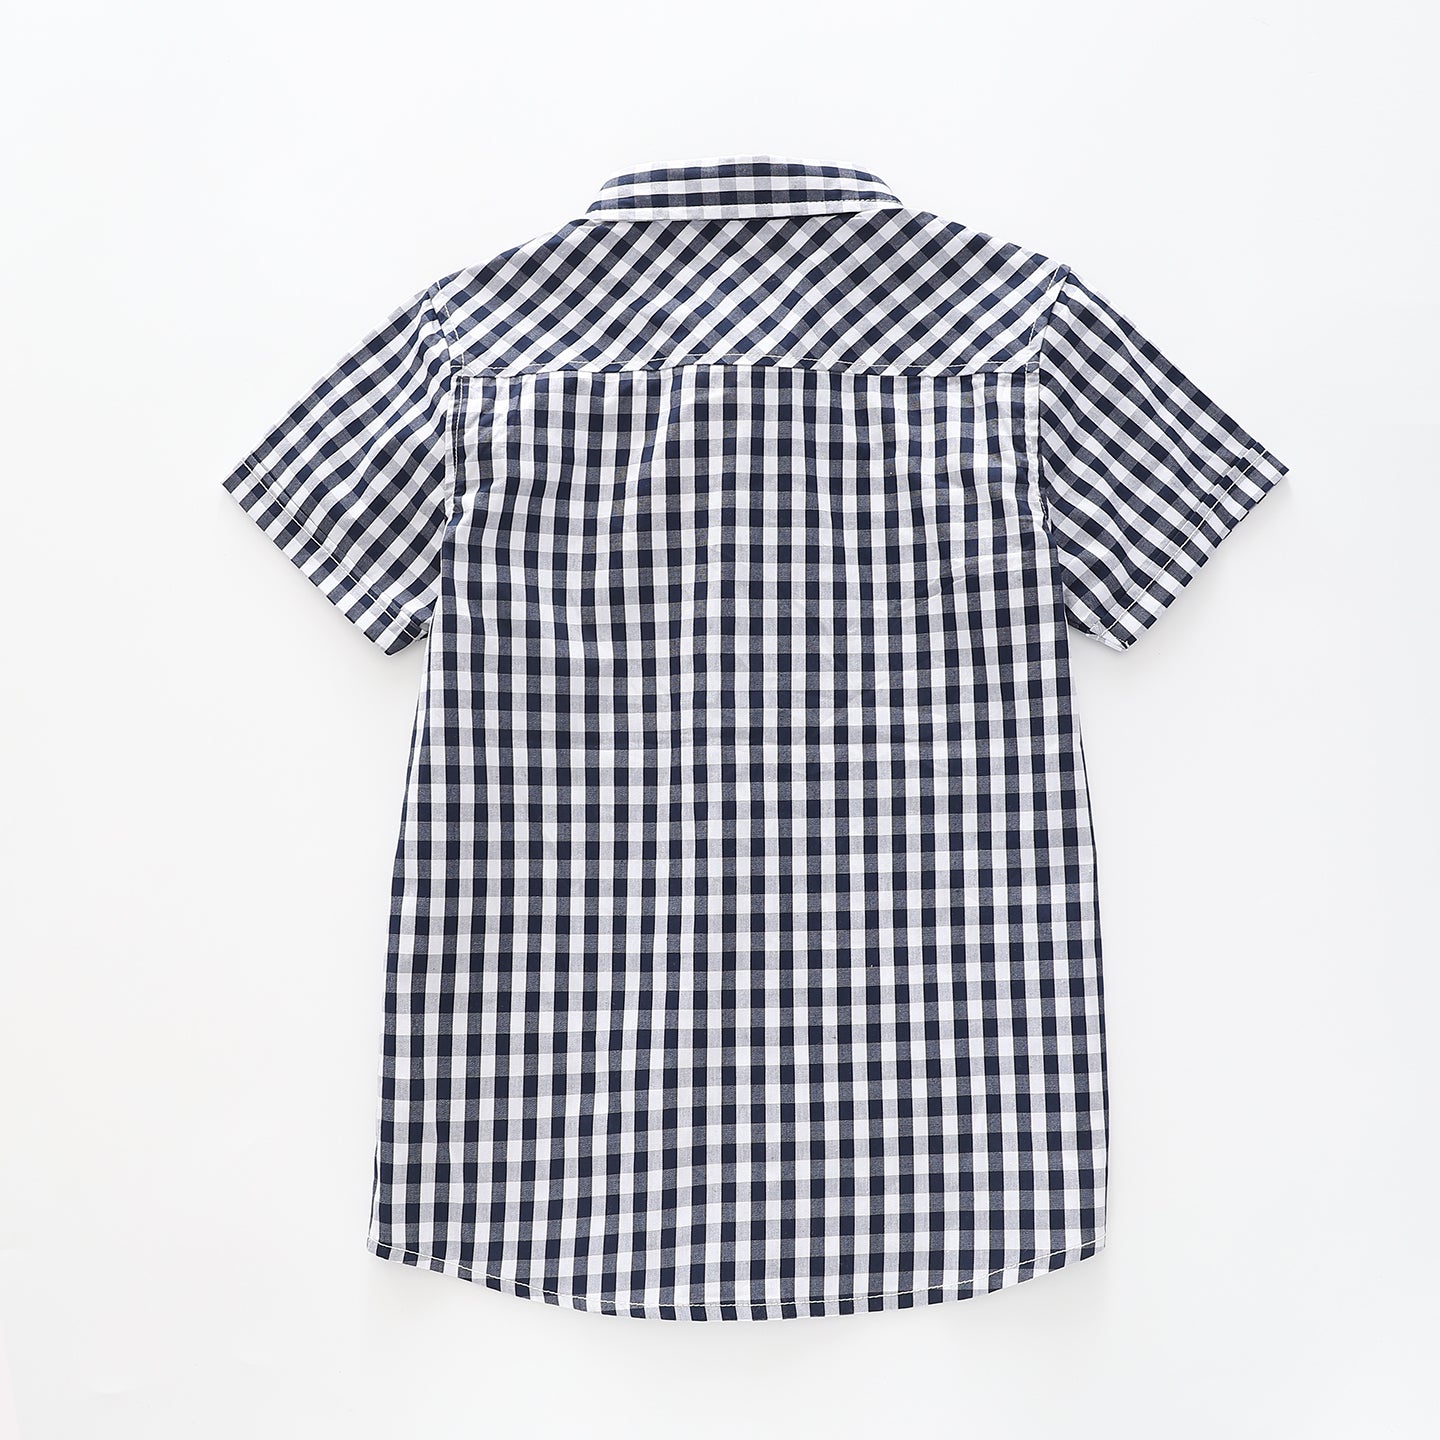 Boy's Blue and White Gingham Button-down Shirt